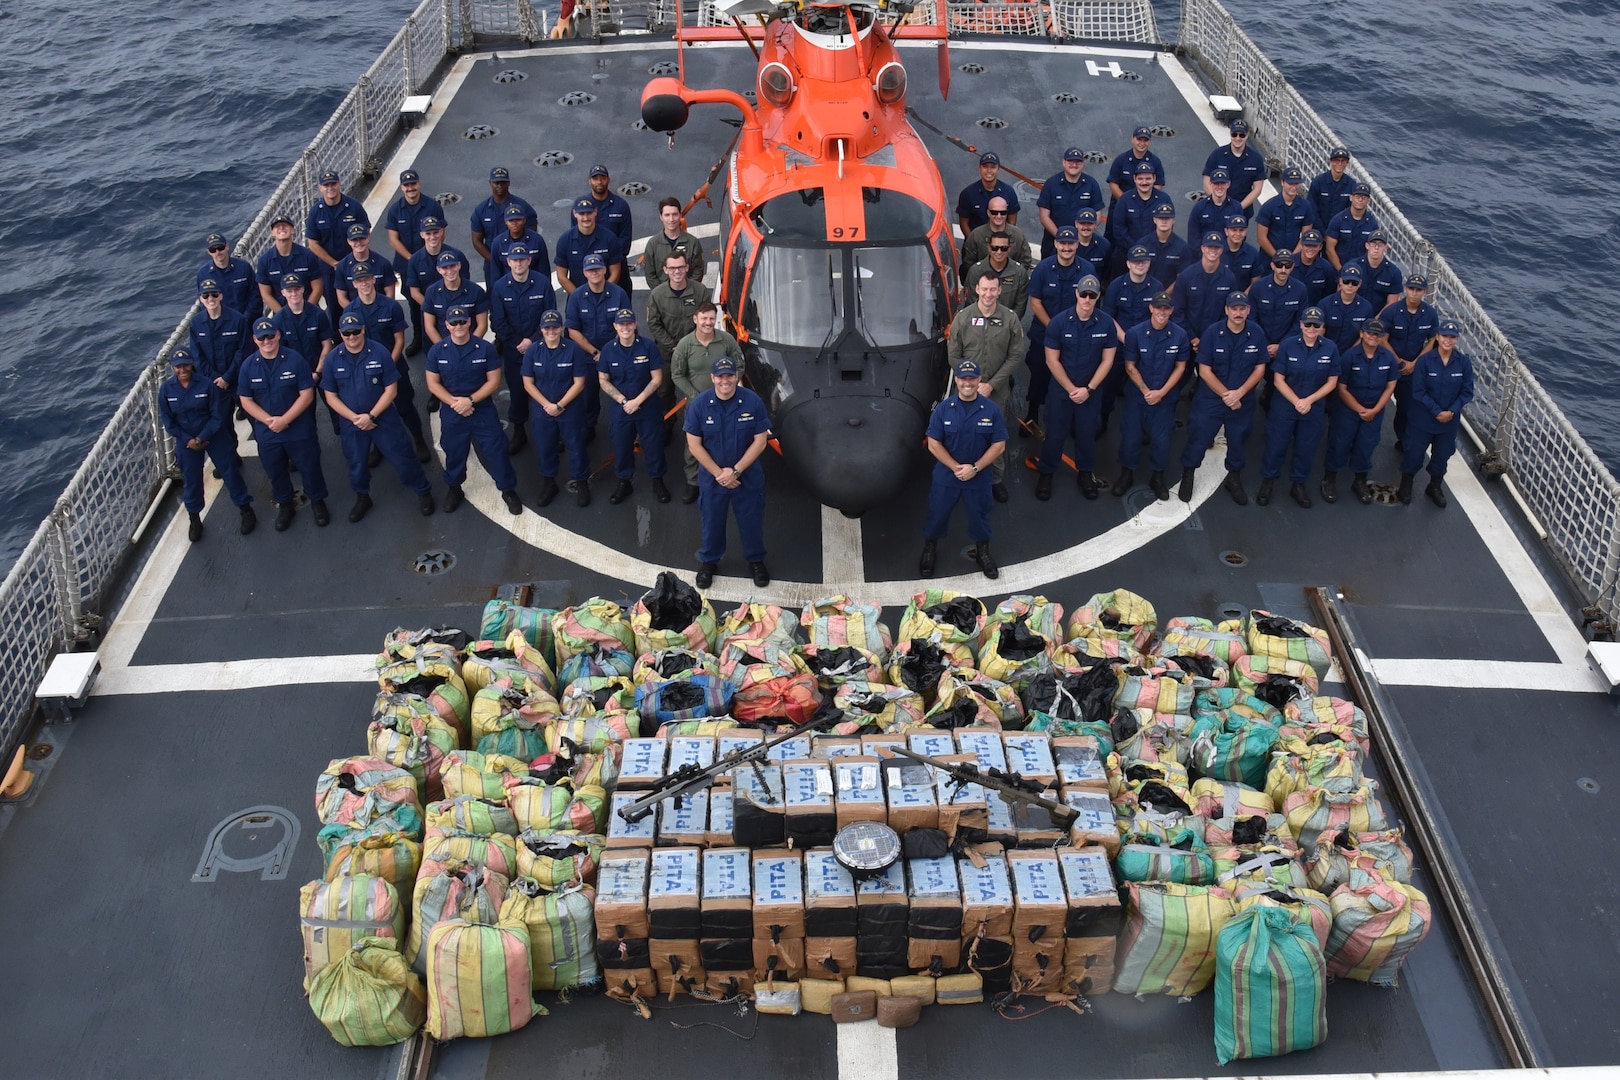 The crew of U.S. Coast Guard Cutter Thetis (WMEC 910) poses for a group photo on the flight deck with over 10,000 pounds of interdicted narcotics in the Eastern Pacific Ocean, Sept. 8, 2023. Thetis' crew patrolled the Eastern Pacific Ocean and Western Caribbean Sea in support of the Coast Guard’s mission to combat illegal drug trafficking. (U.S. Coast Guard photo by Ensign Lauren Daugherty)